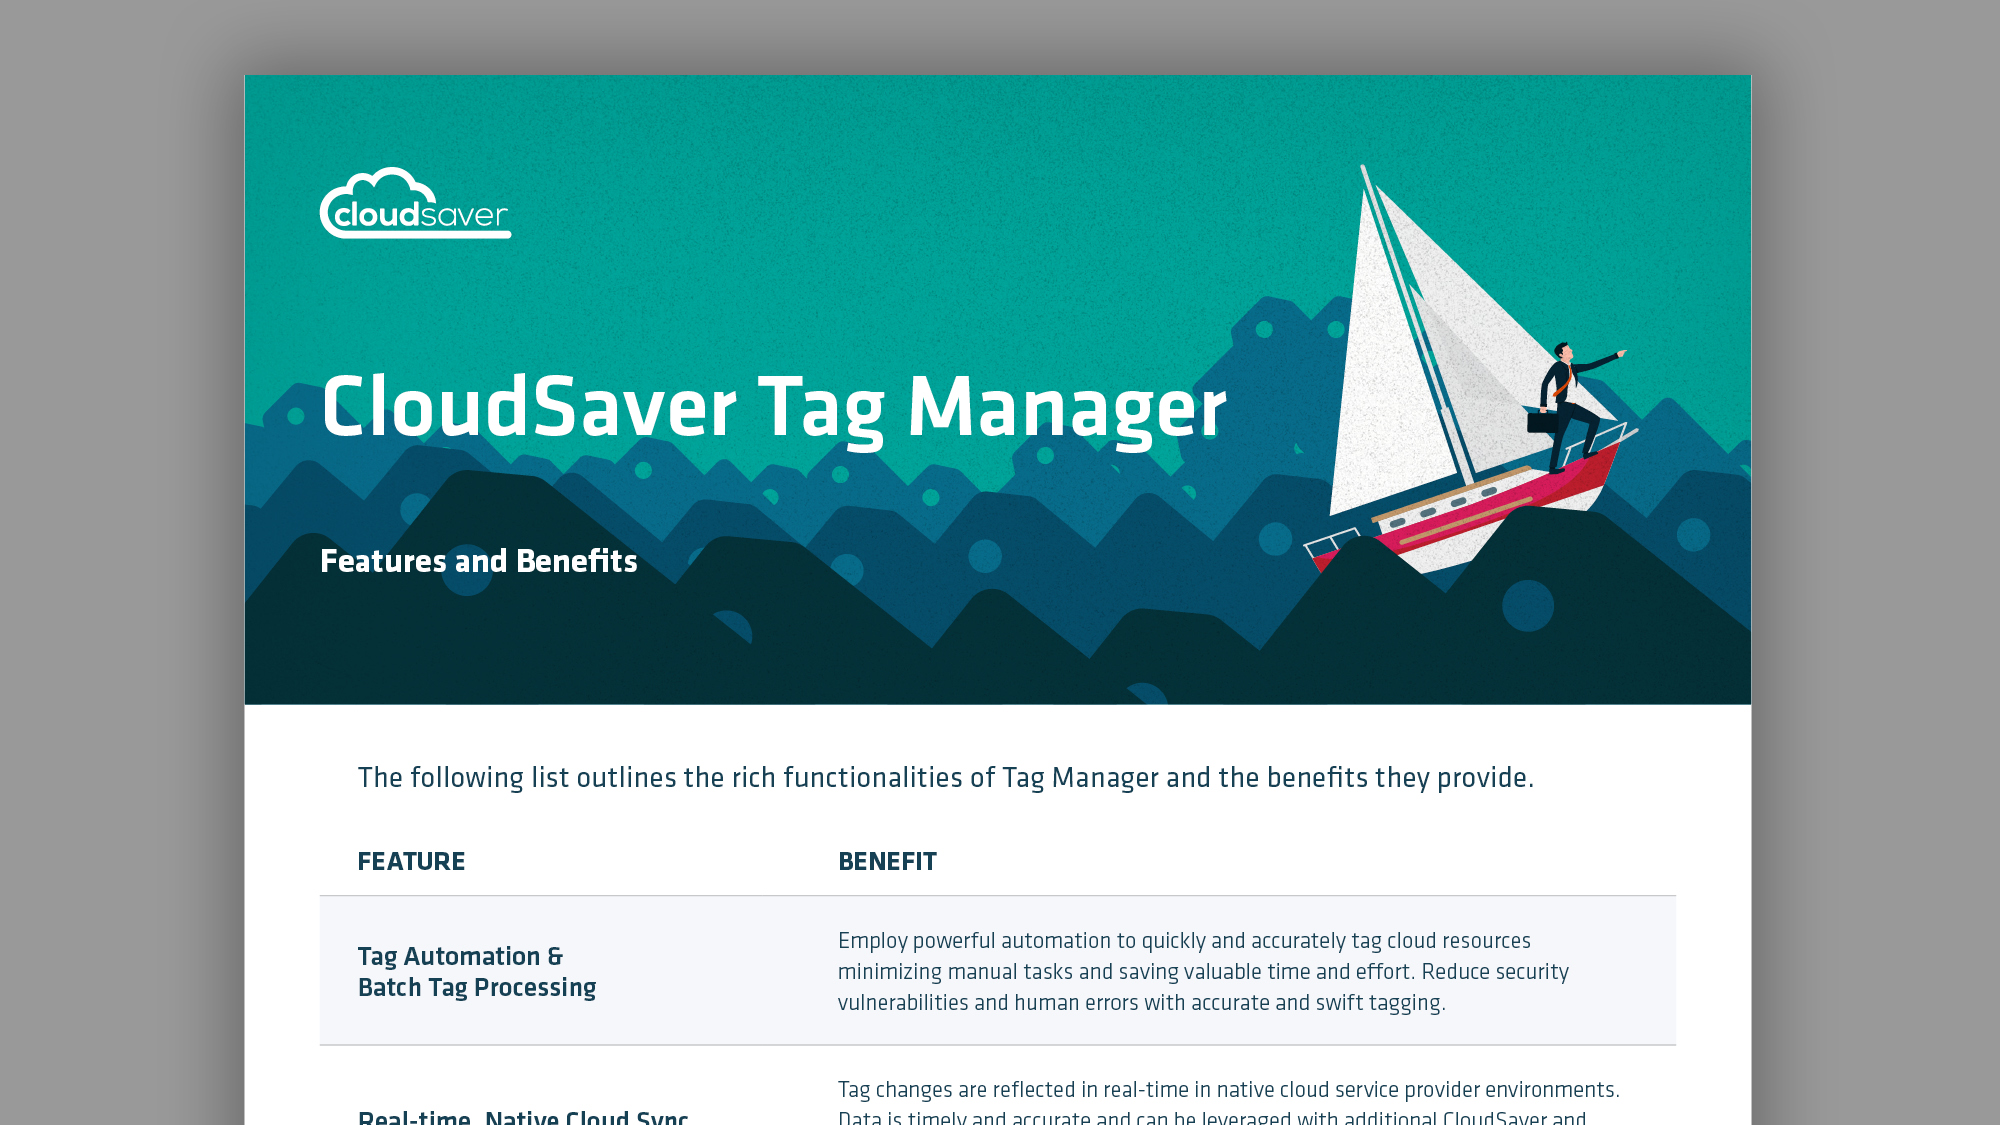 Cloudsaver – Tag Manager Features & Benefits